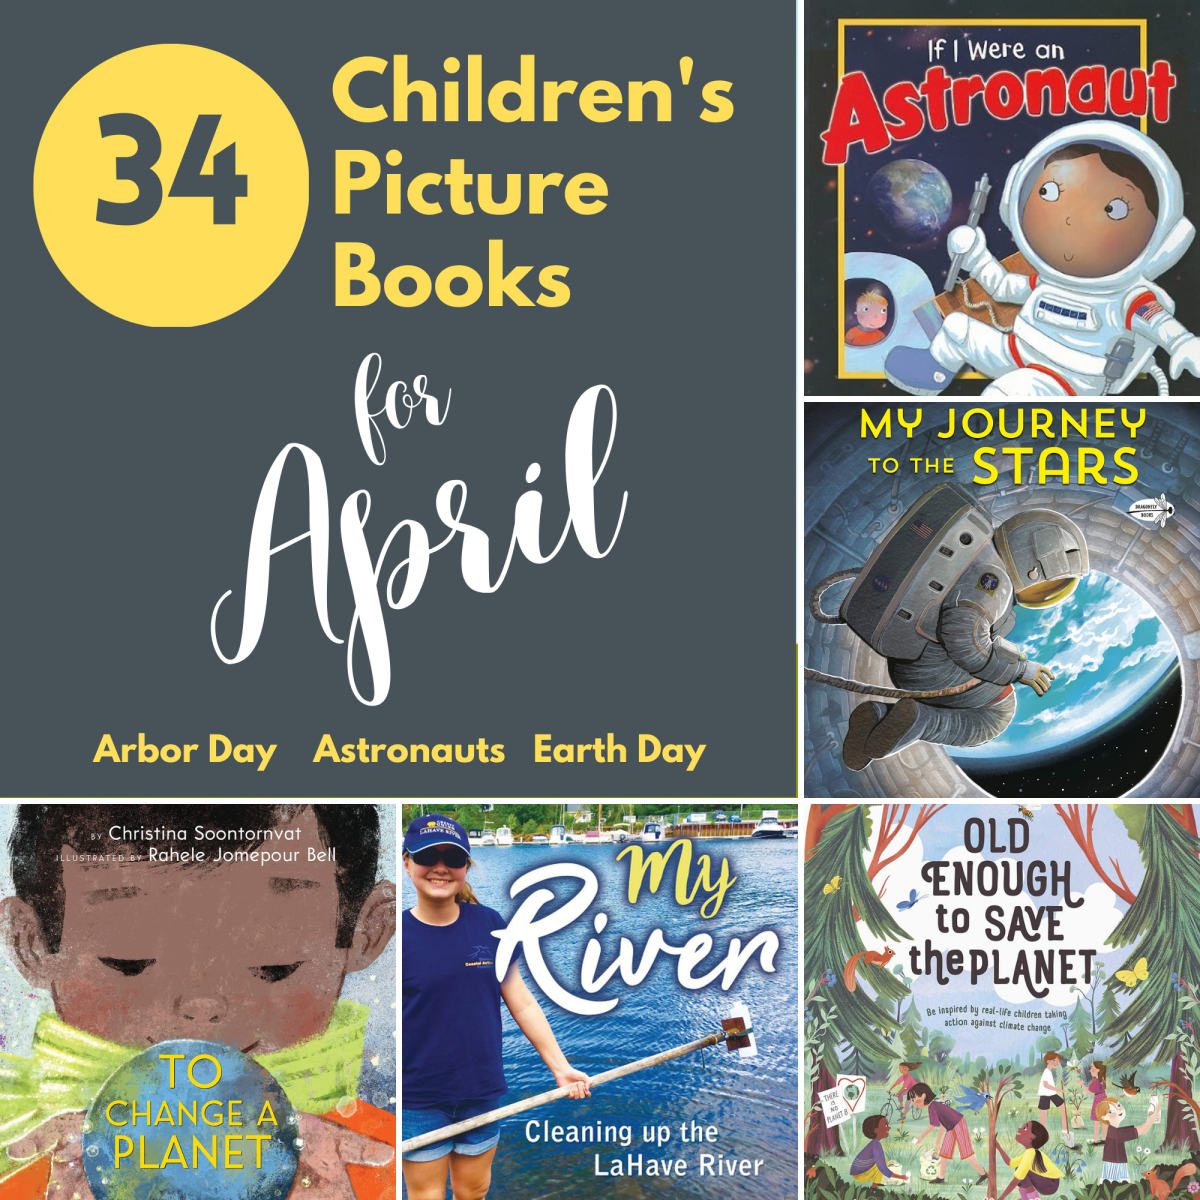 34 Children's Picture Books for April: Arbor Day, Astronauts, and Earth Day